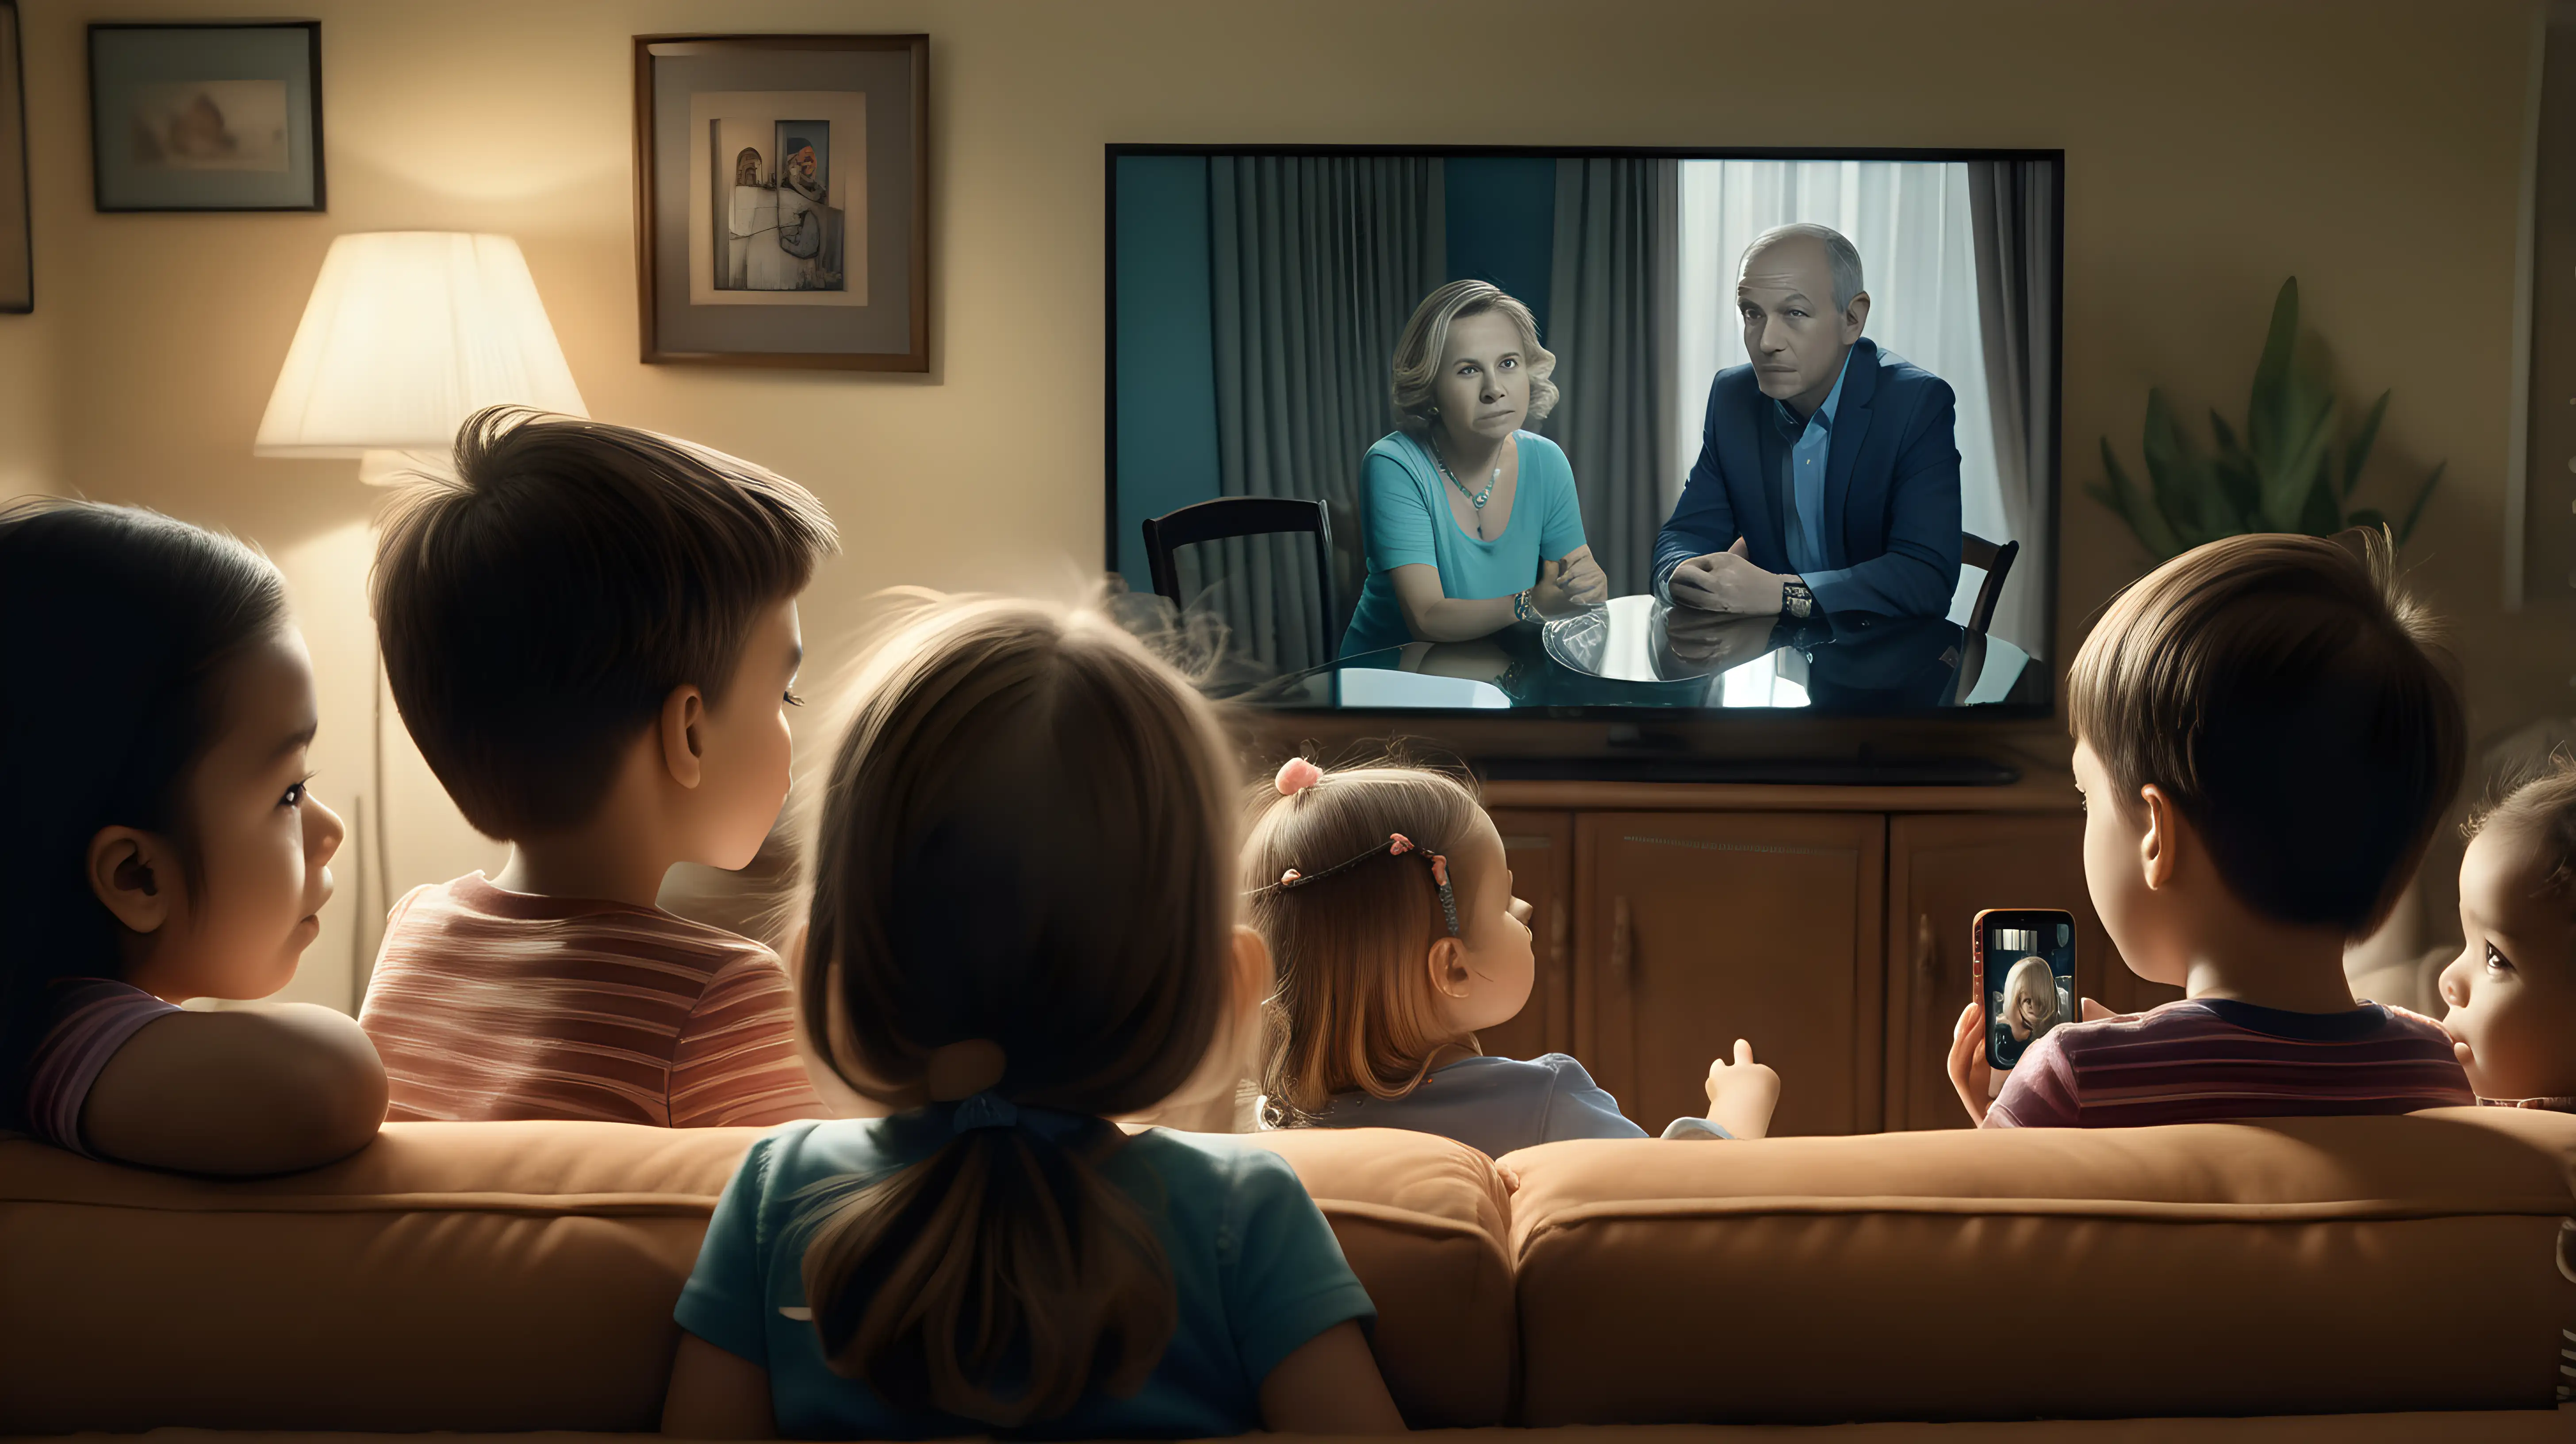 Experiment with capturing the reflection of the television screen in the eyes of the family members, adding a touch of cinematic magic to the images and emphasizing the centrality of the shared viewing experience.